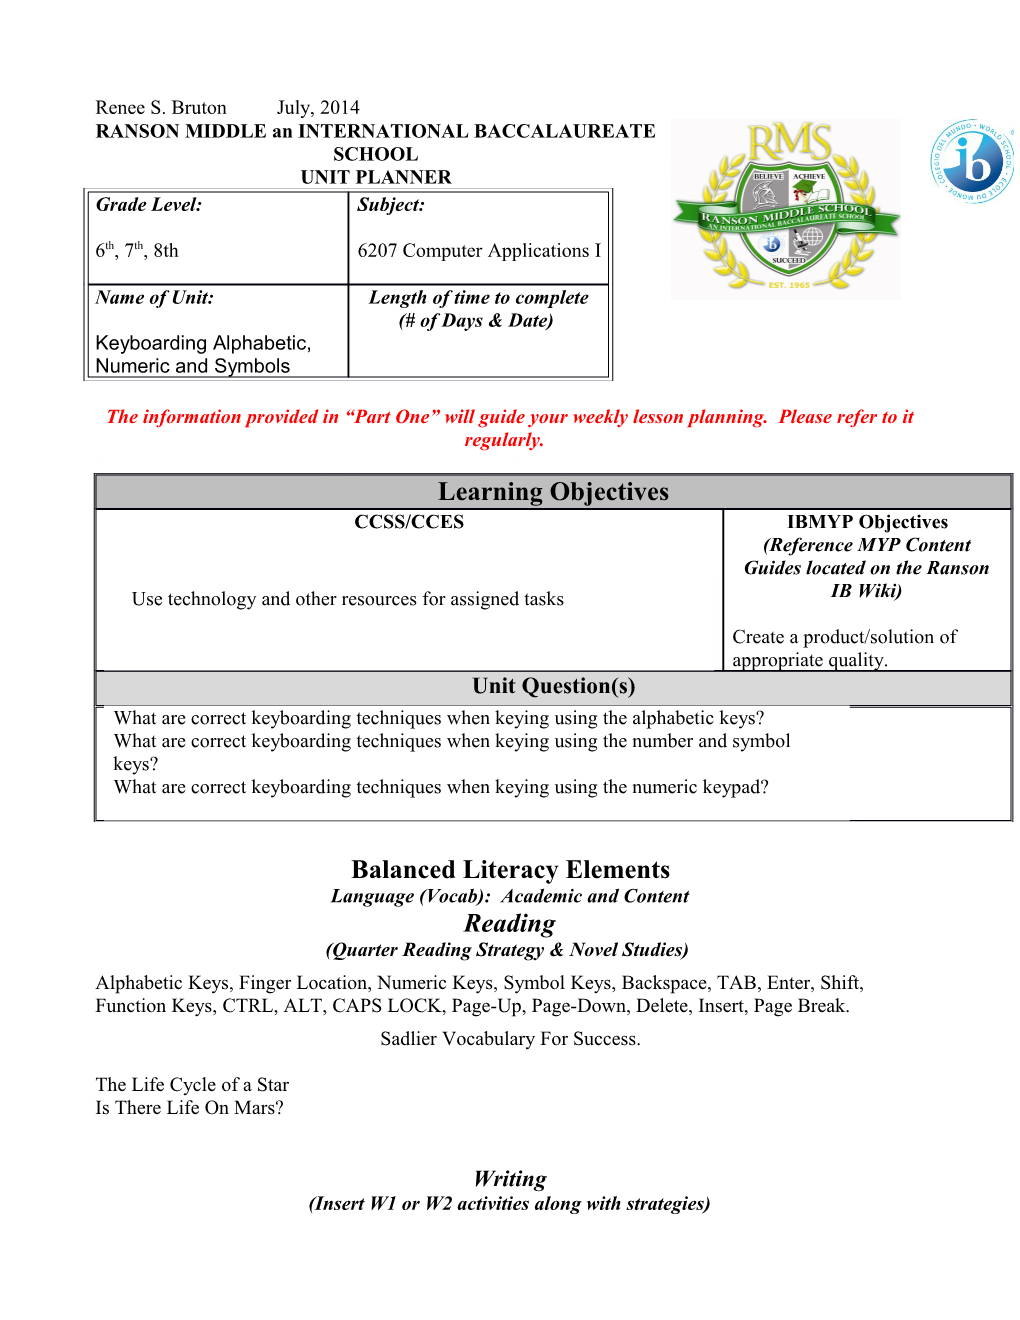 The Information Provided in Part One Will Guide Your Weekly Lesson Planning. Please Refer